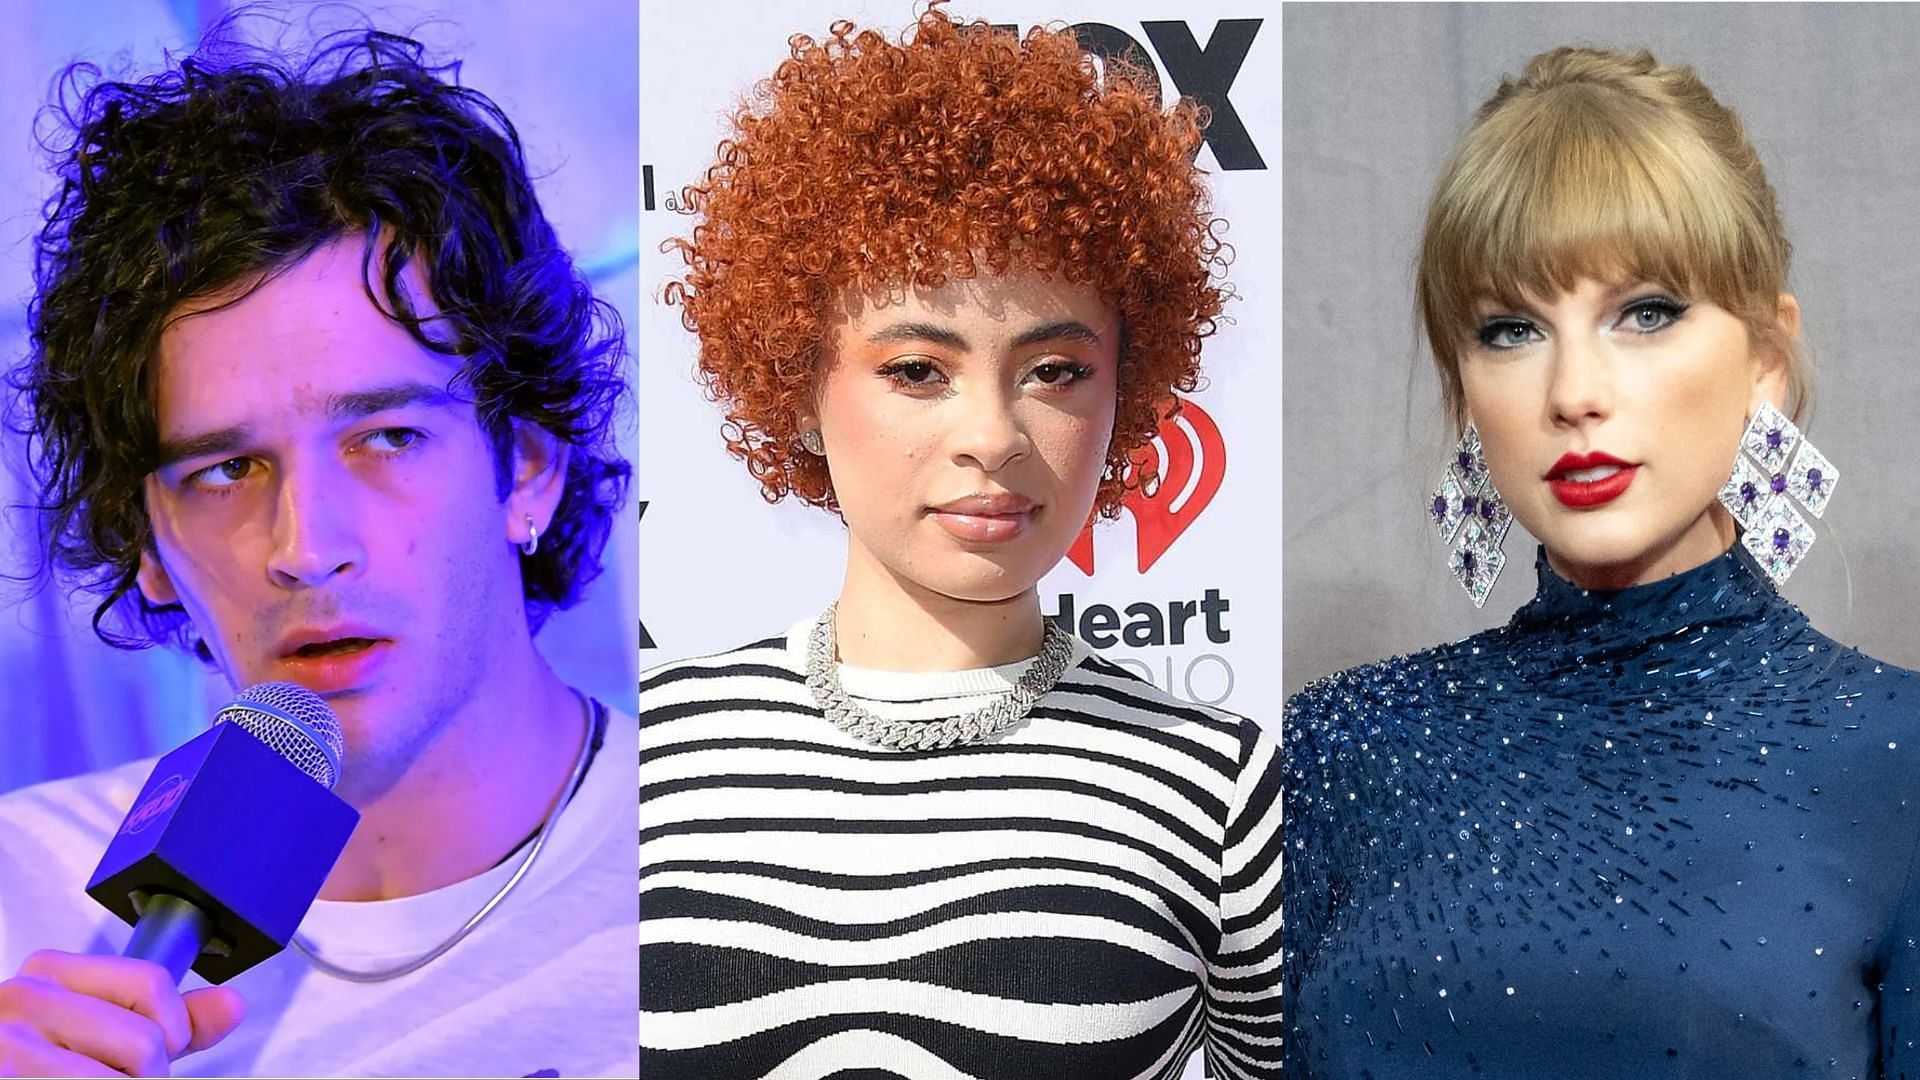 Matty Healy, Ice Spice, Taylor Swift. (Photos via Getty Images)